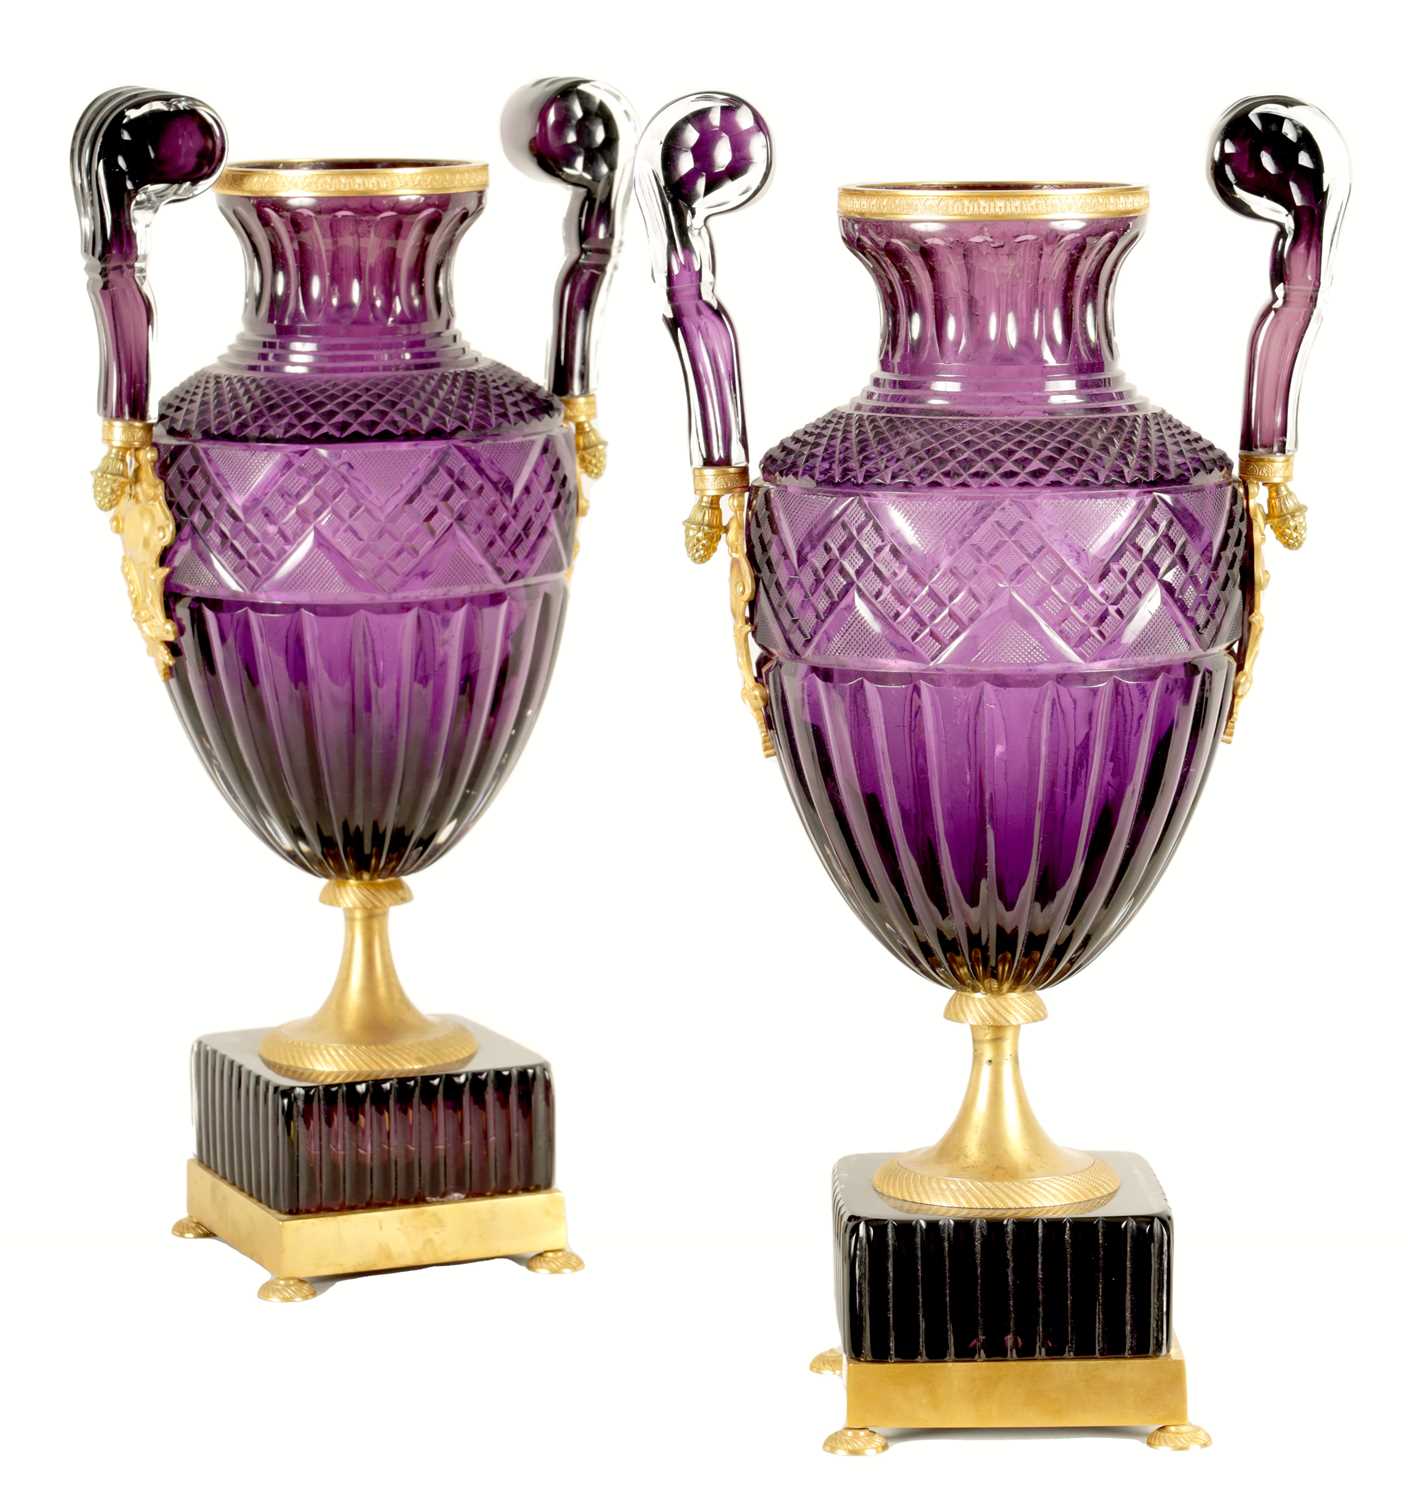 A LARGE PAIR OF LATE 19TH/EARLY 20TH CENTURY RUSSIAN ORMOLU MOUNTED AMETHYST CUT-GLASS